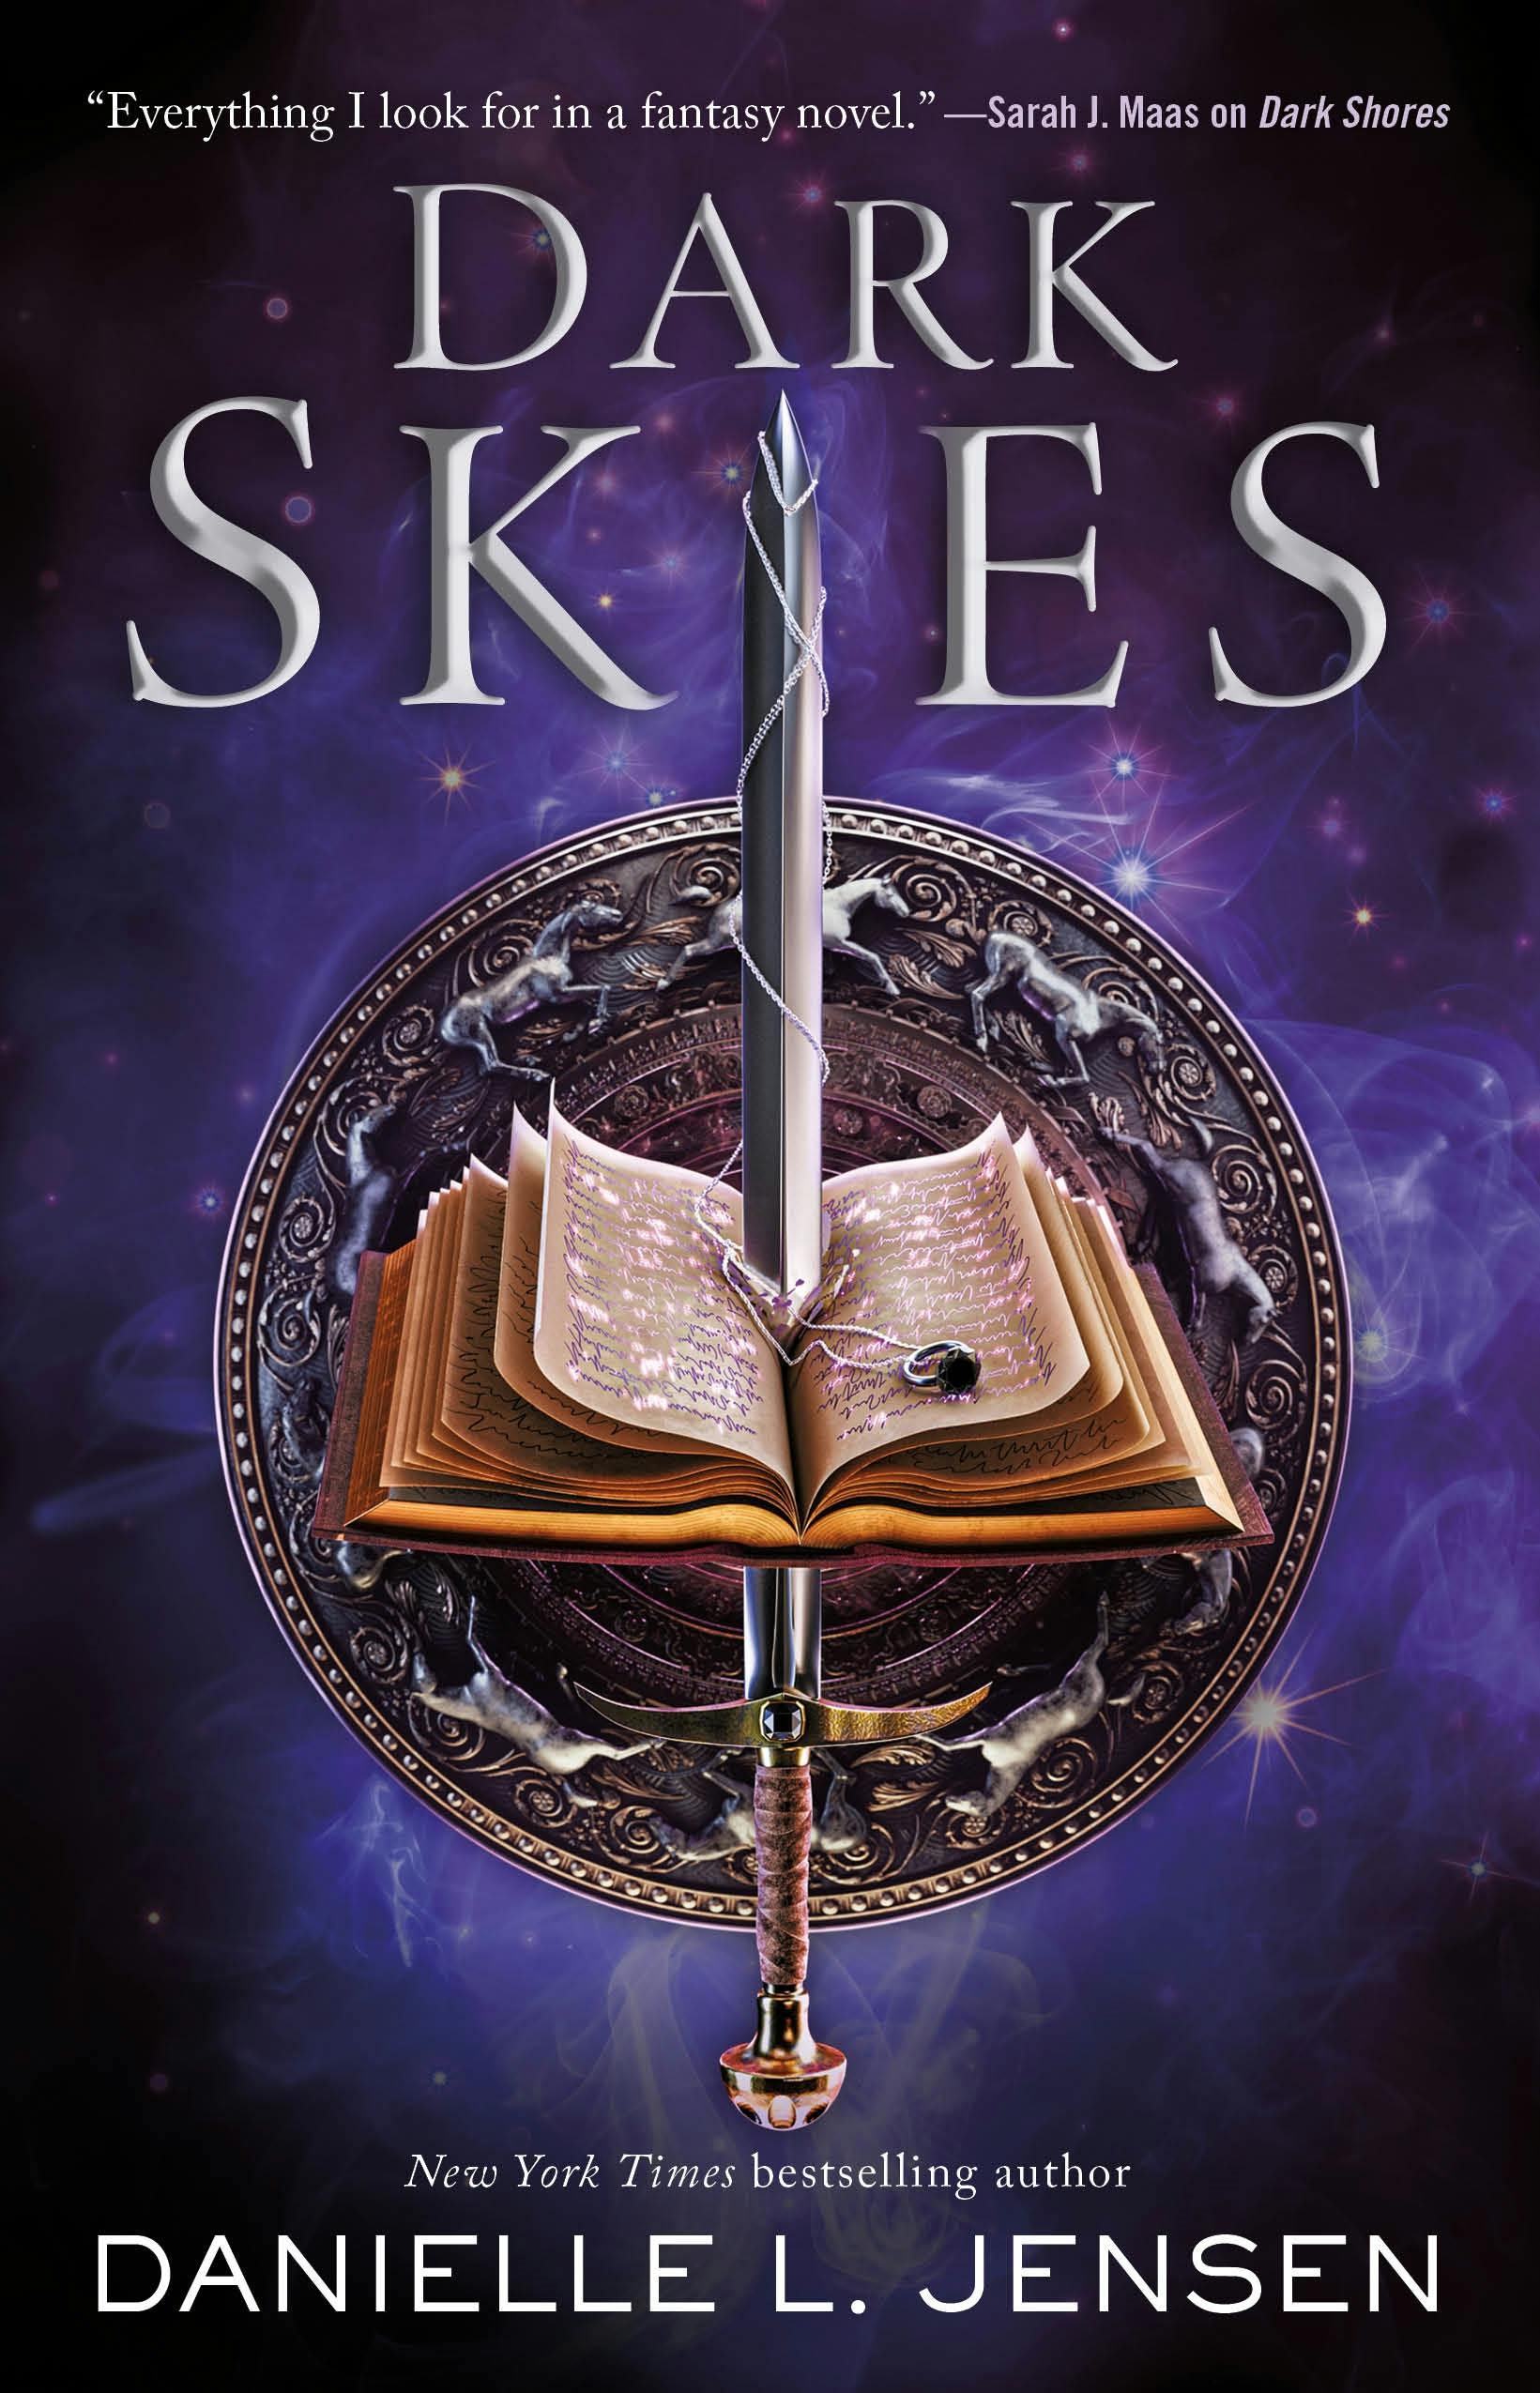 Cover for the book titled as: Dark Skies